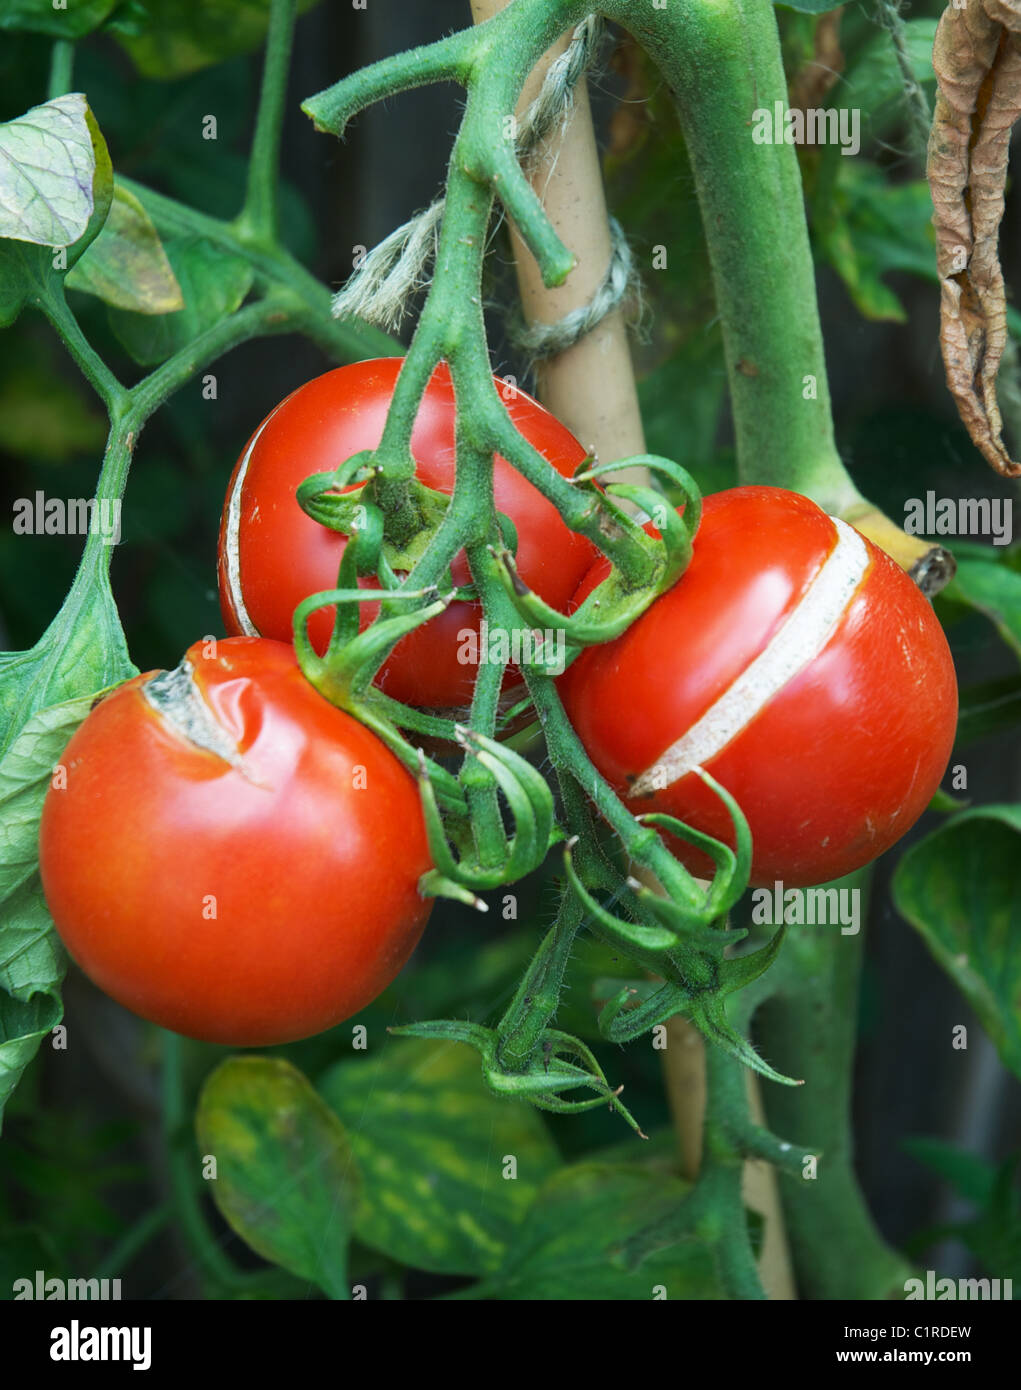 Tomatoes on vine with splits on them Stock Photo